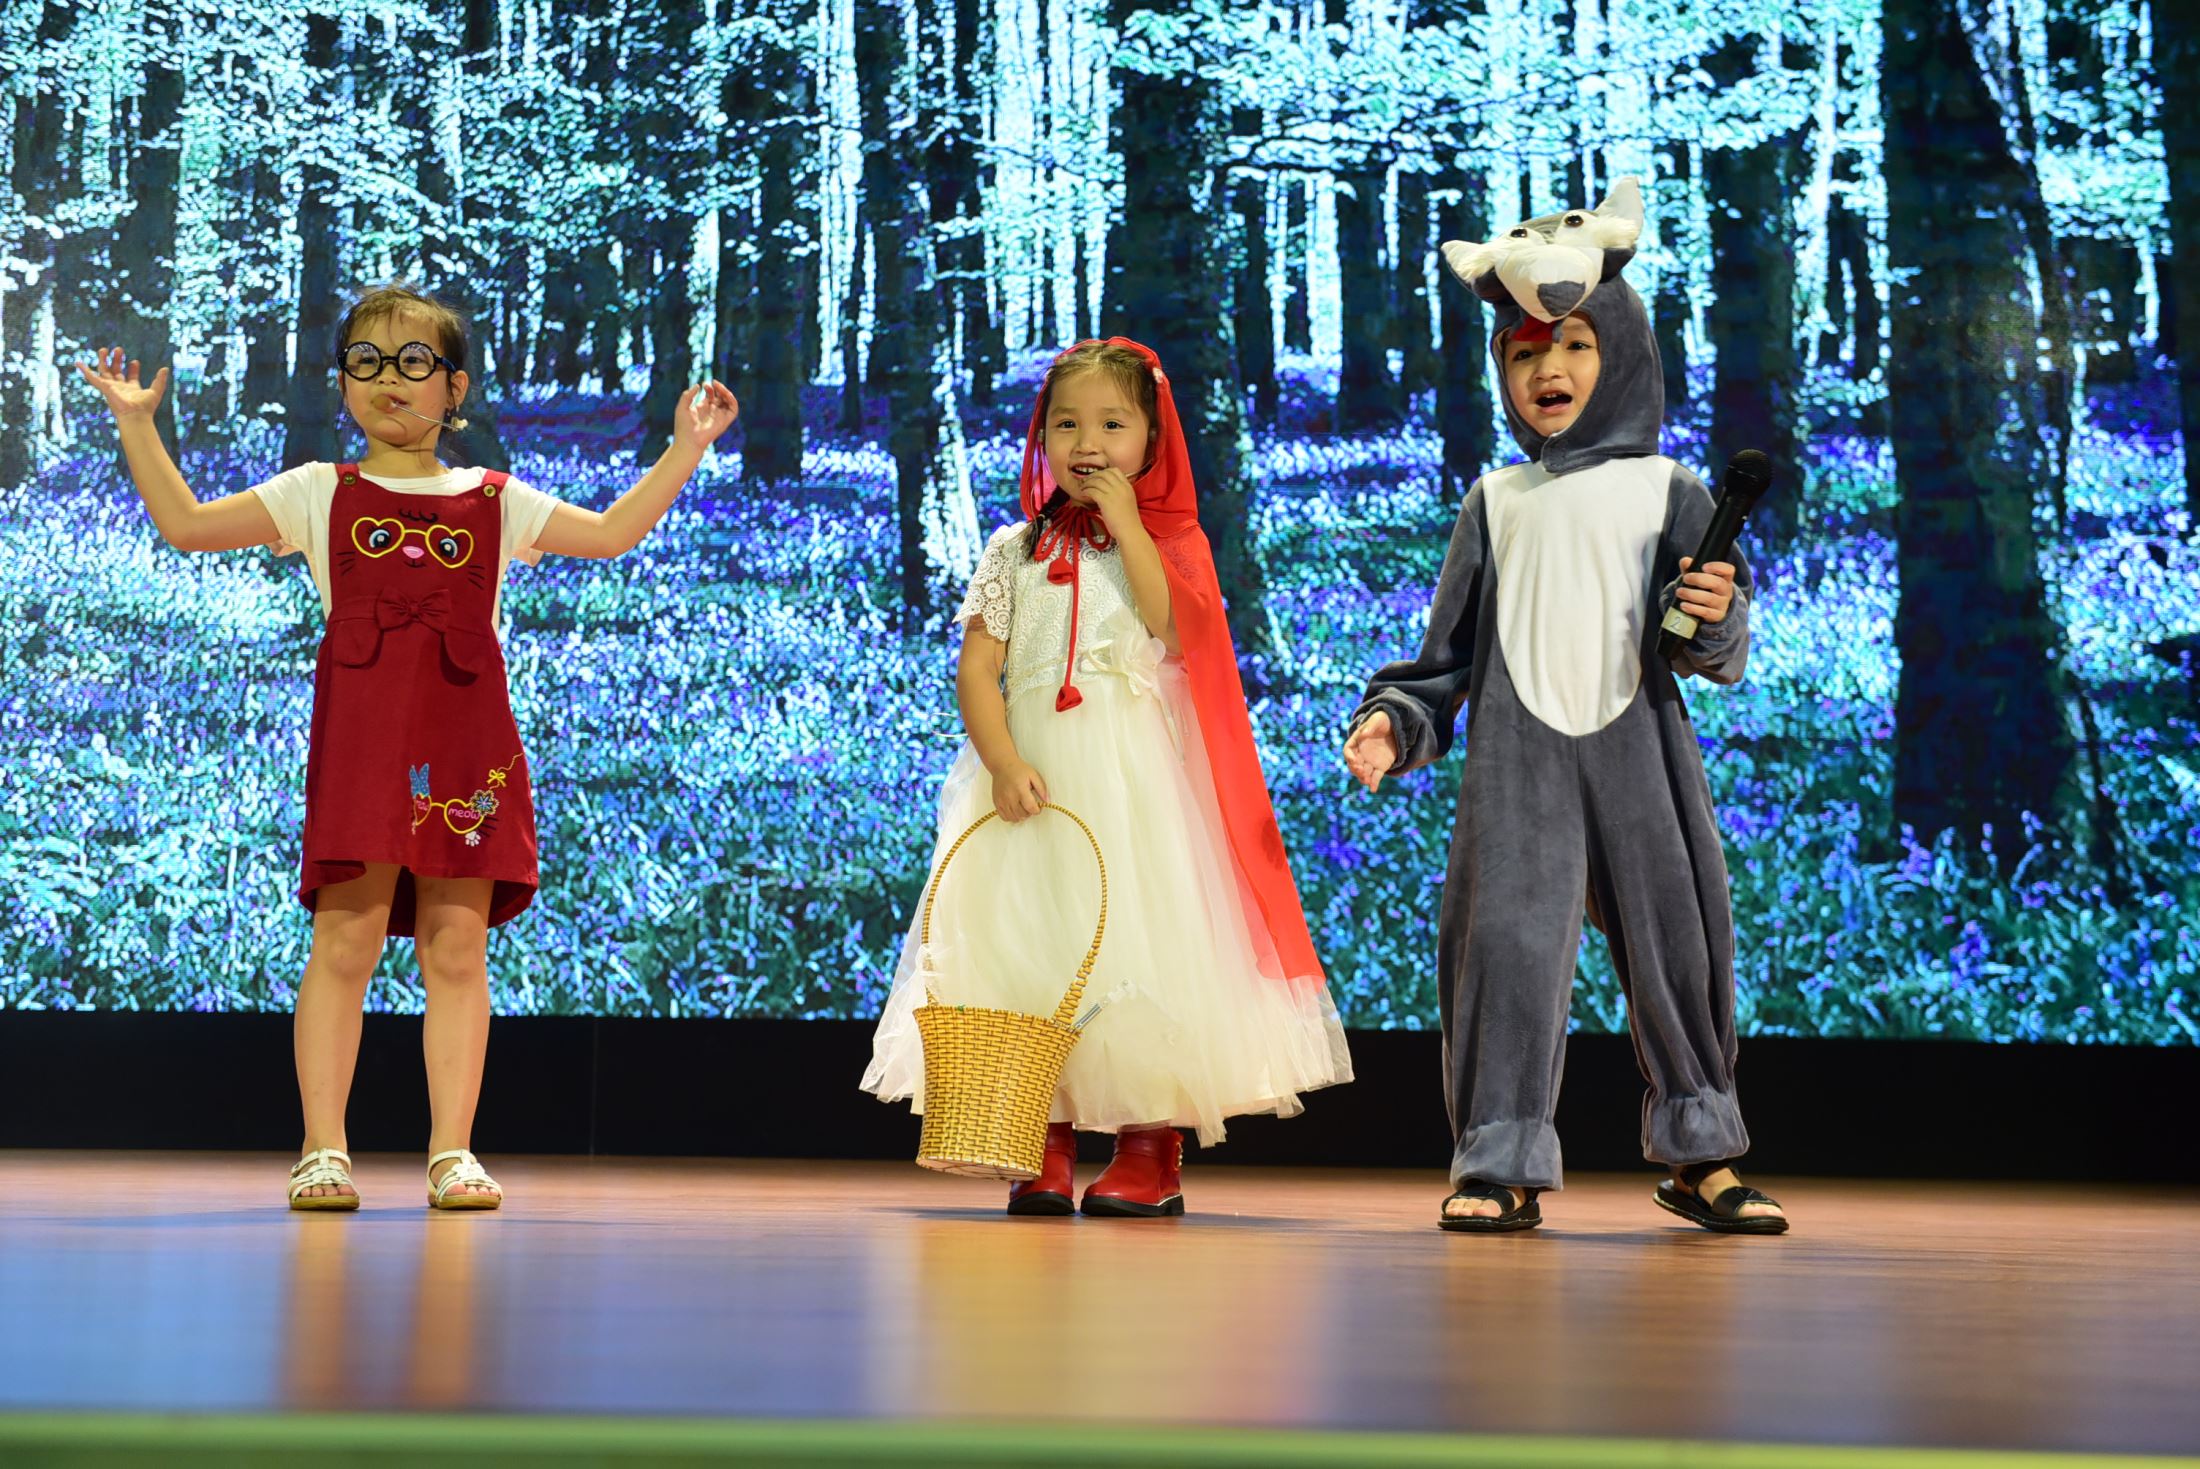 Dang Ngoc My Tu, Chau Xuan Khanh and Duong Gia Phat from iSchool Tra Vinh made a great impression with their story: “Little Red Riding Hood.”